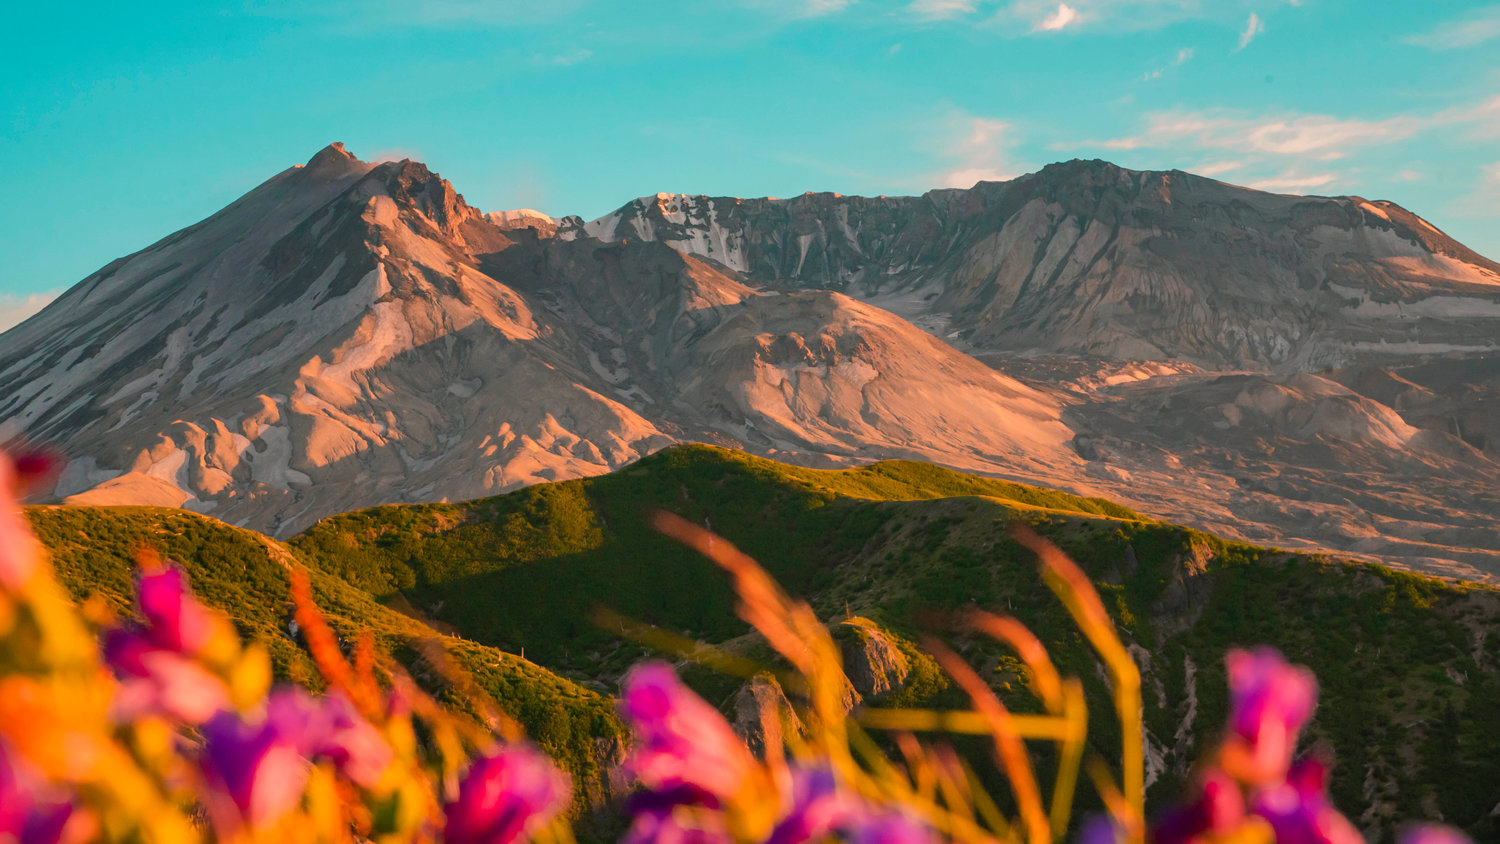 Wildflowers sway in the sunlight in front of Mount St. Helens as the volcano’s crater sets the backdrop along Windy Ridge Trail.